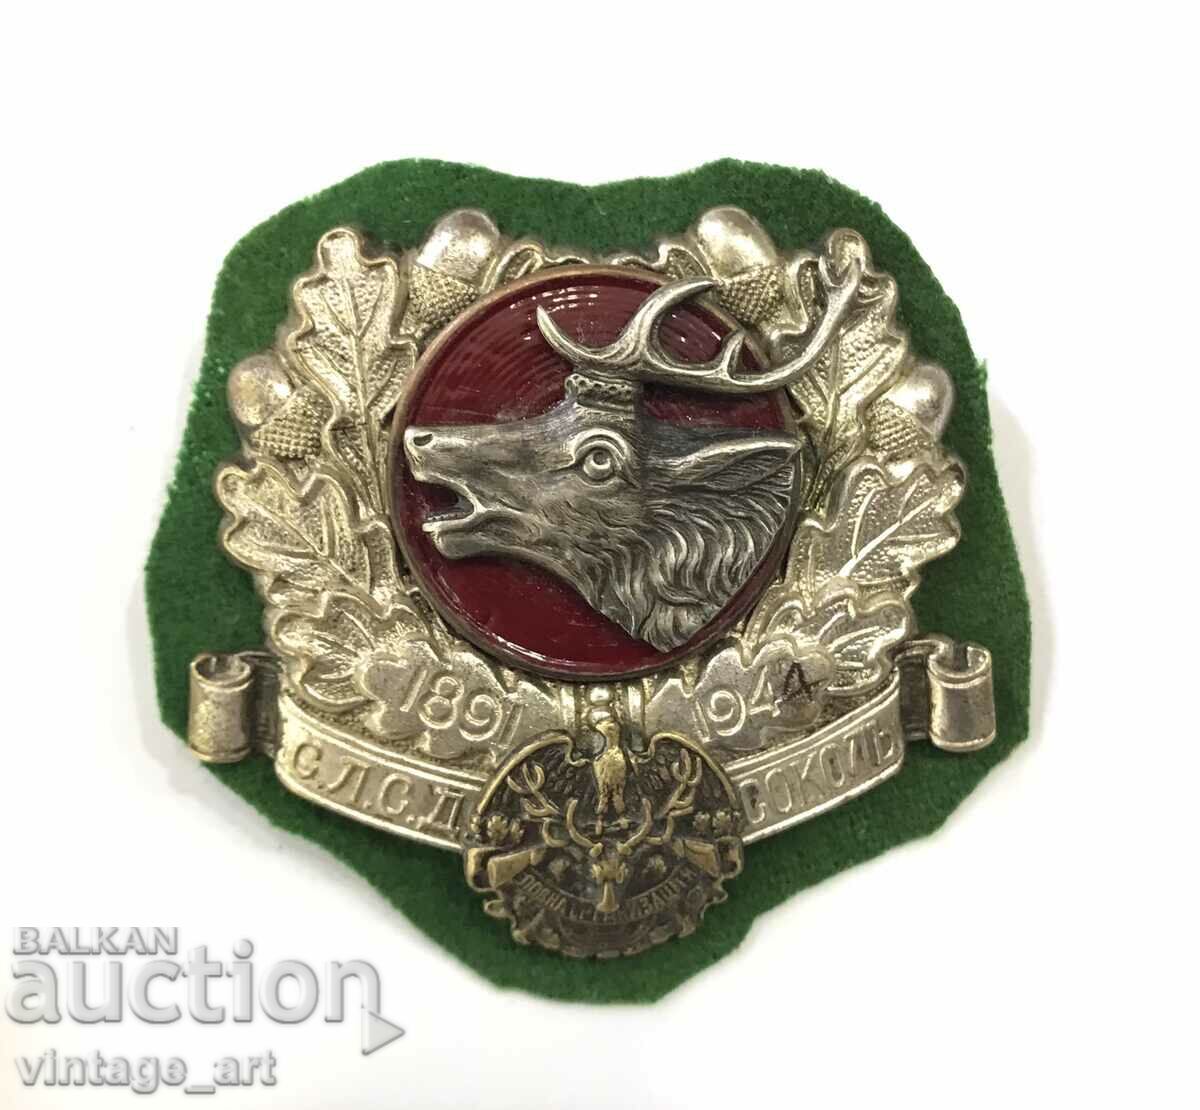 Jubilee badge 1891-1944. of the hunting company S.L.S.D. Falcon